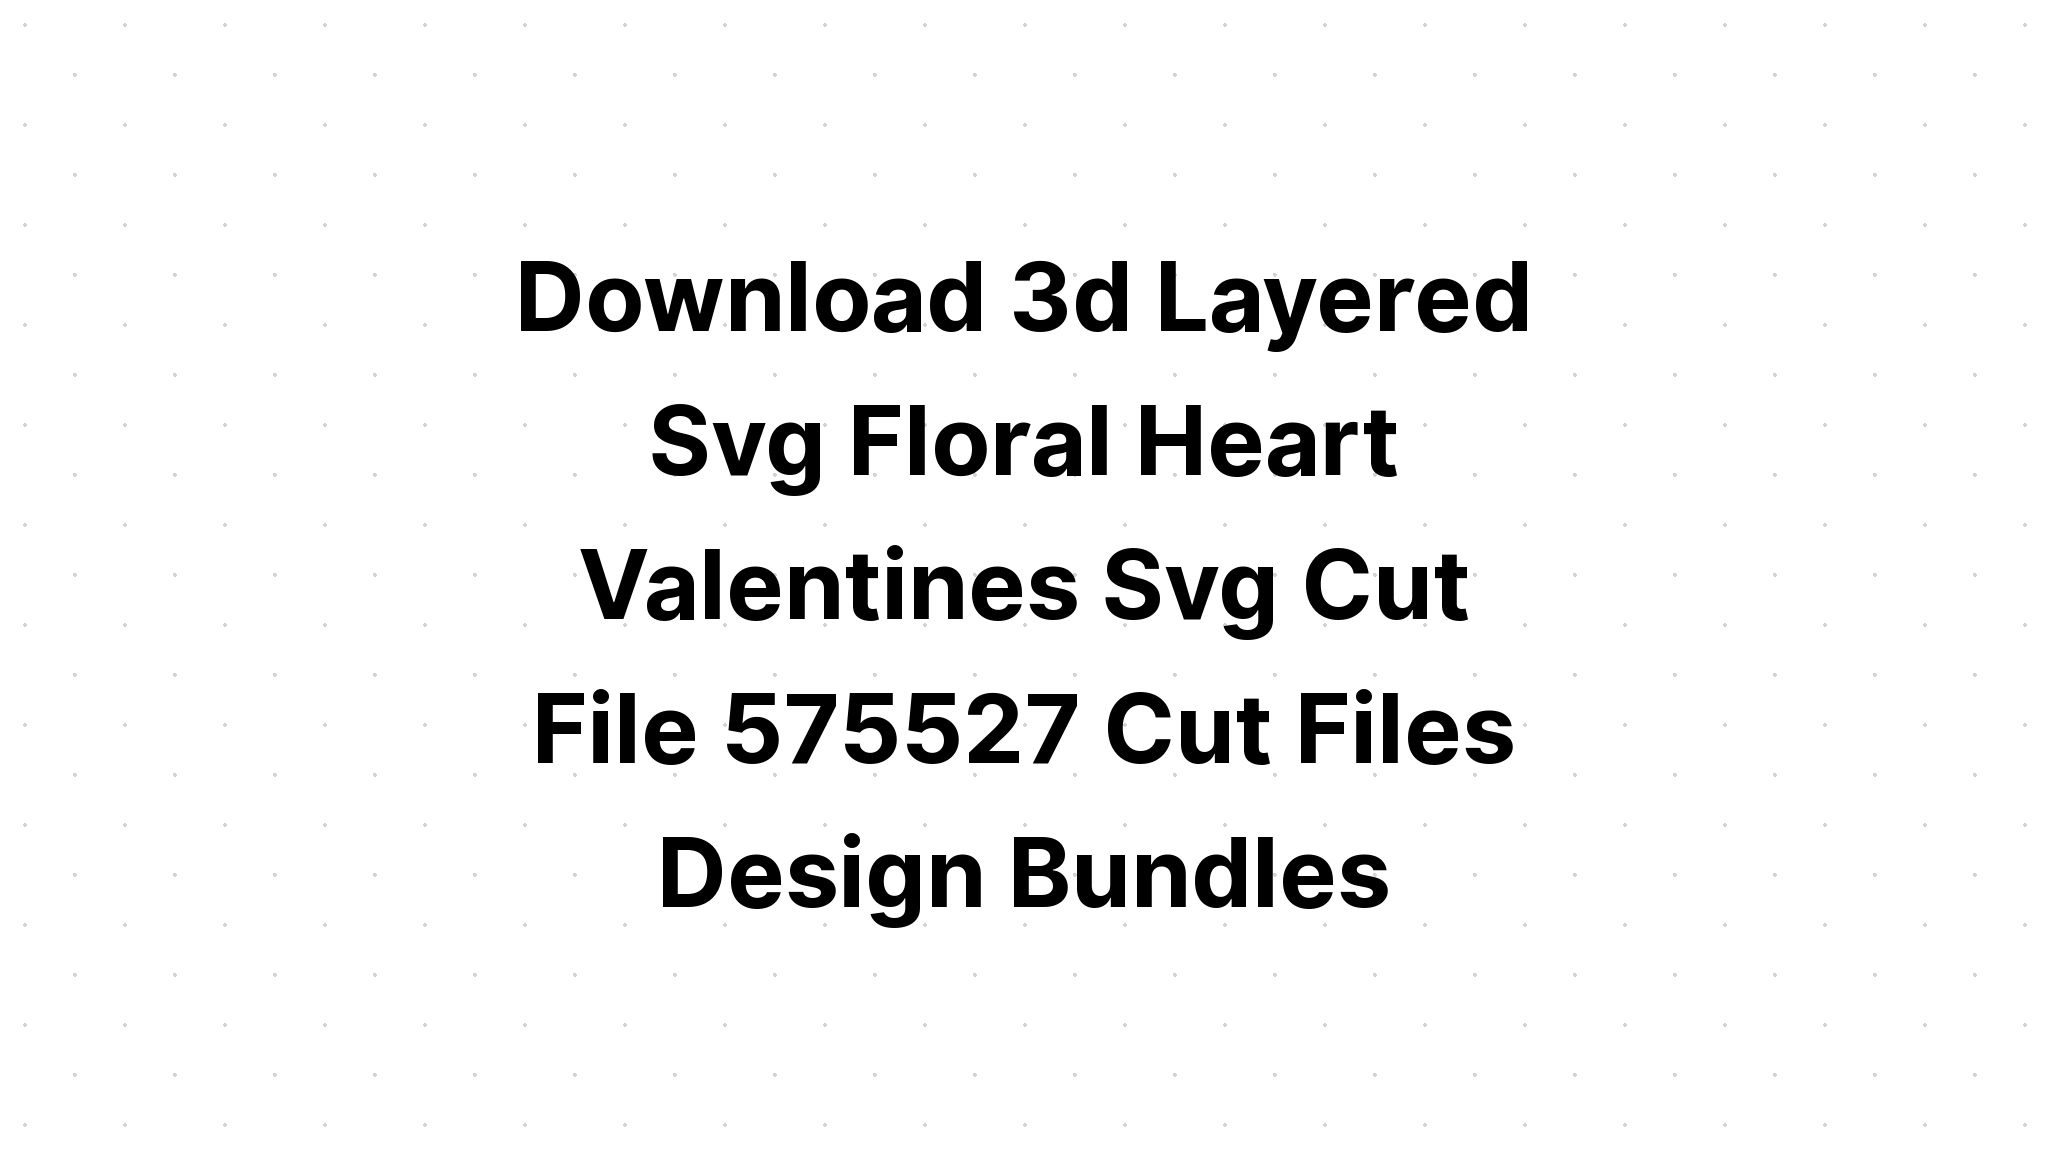 Download Multi Layered Svg Files For Silhouette - Layered SVG Cut File